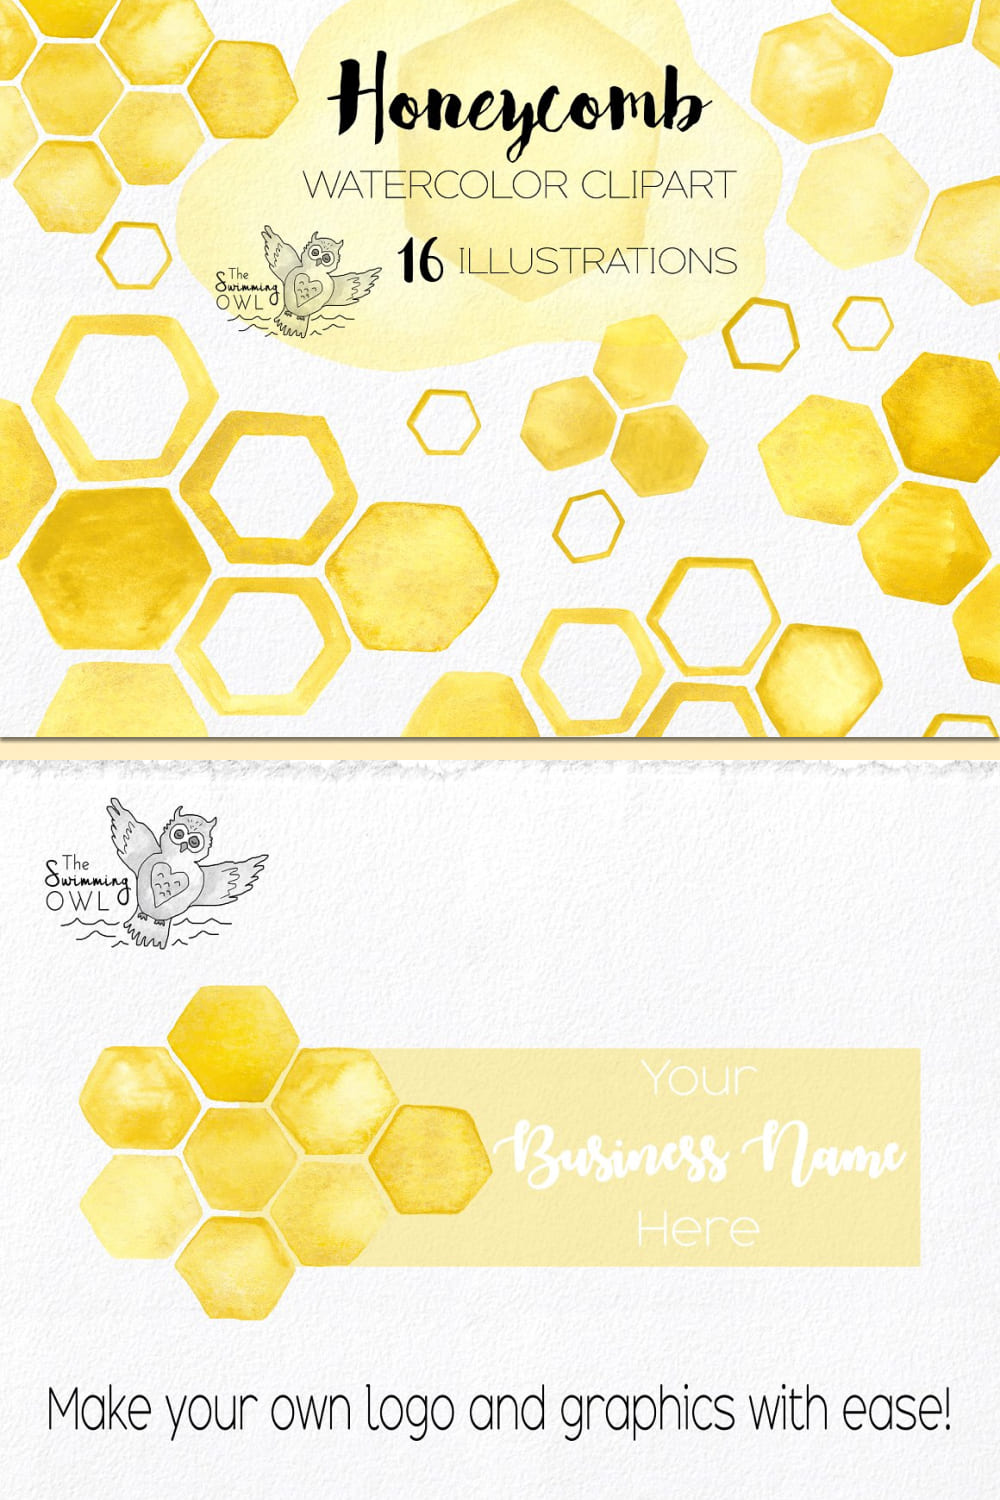 Honeycomb watercolor clipart - pinterest image preview.